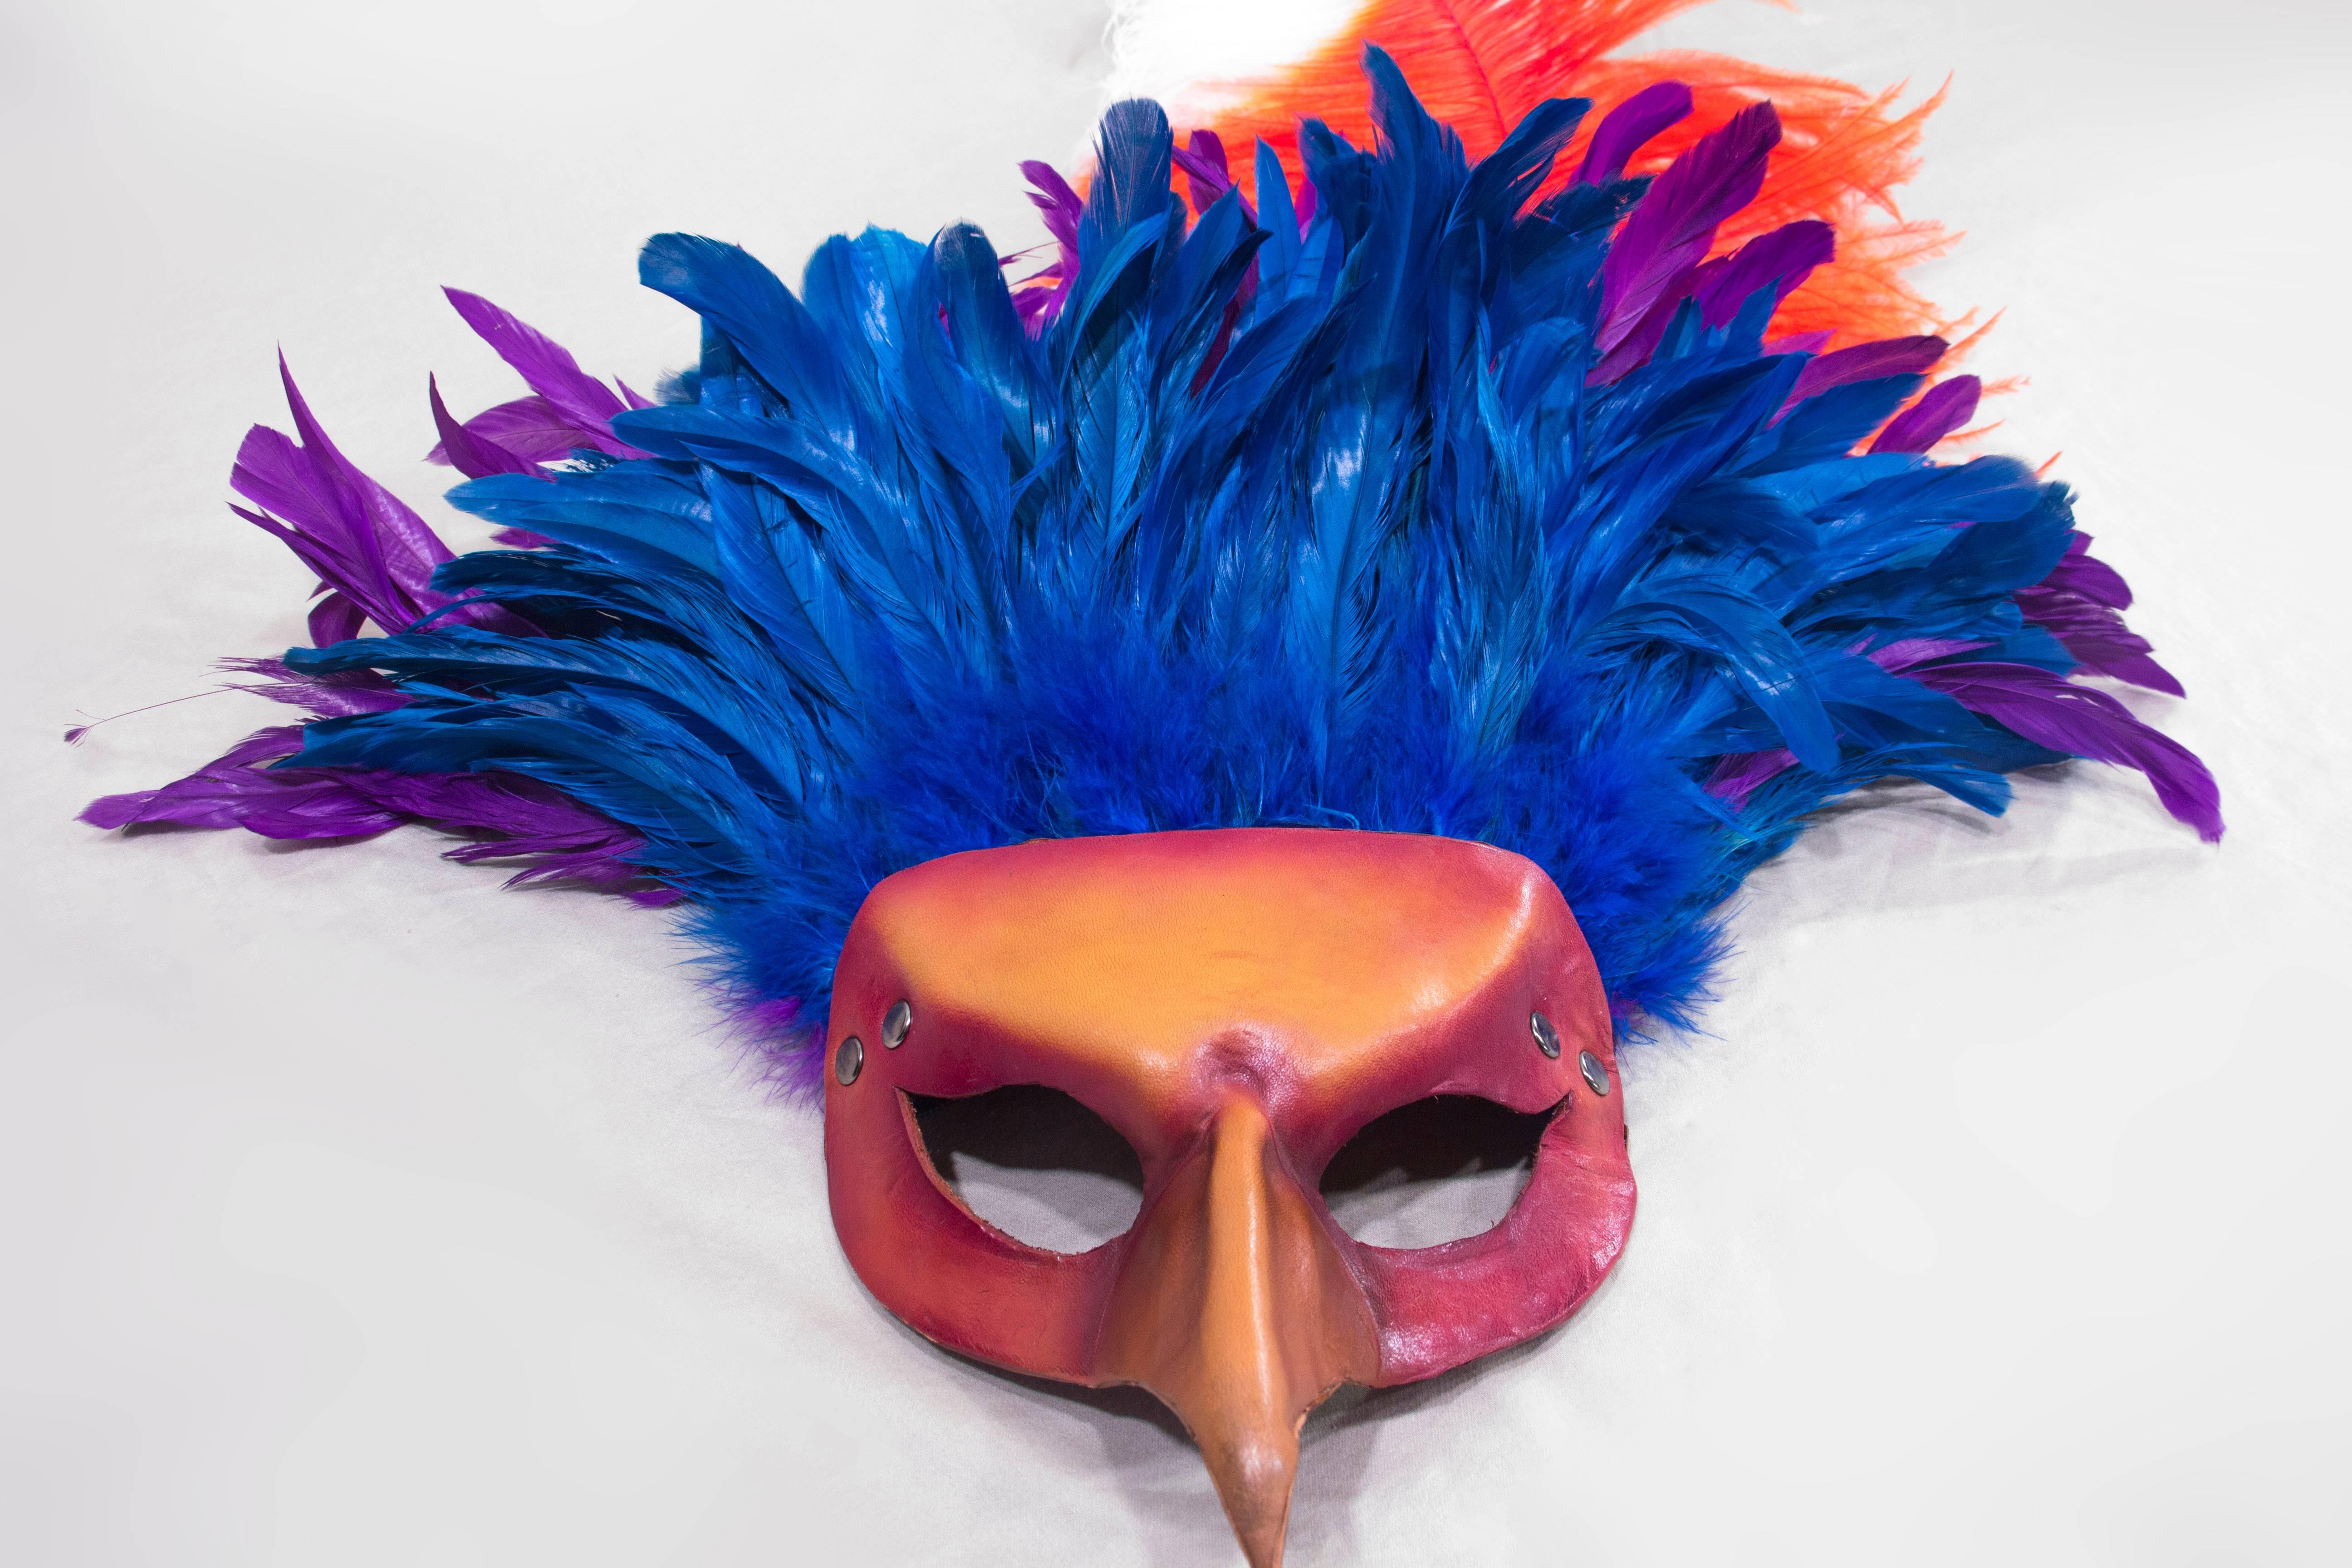 Inspired by Mardi Gras and Venetian masks. Vibrantly dyed blue and purple feathers crown this purple and yellow bird with a large orange dyed ostrich feather with a white tip to really stand out at any party or parade. This piece is wearable art,